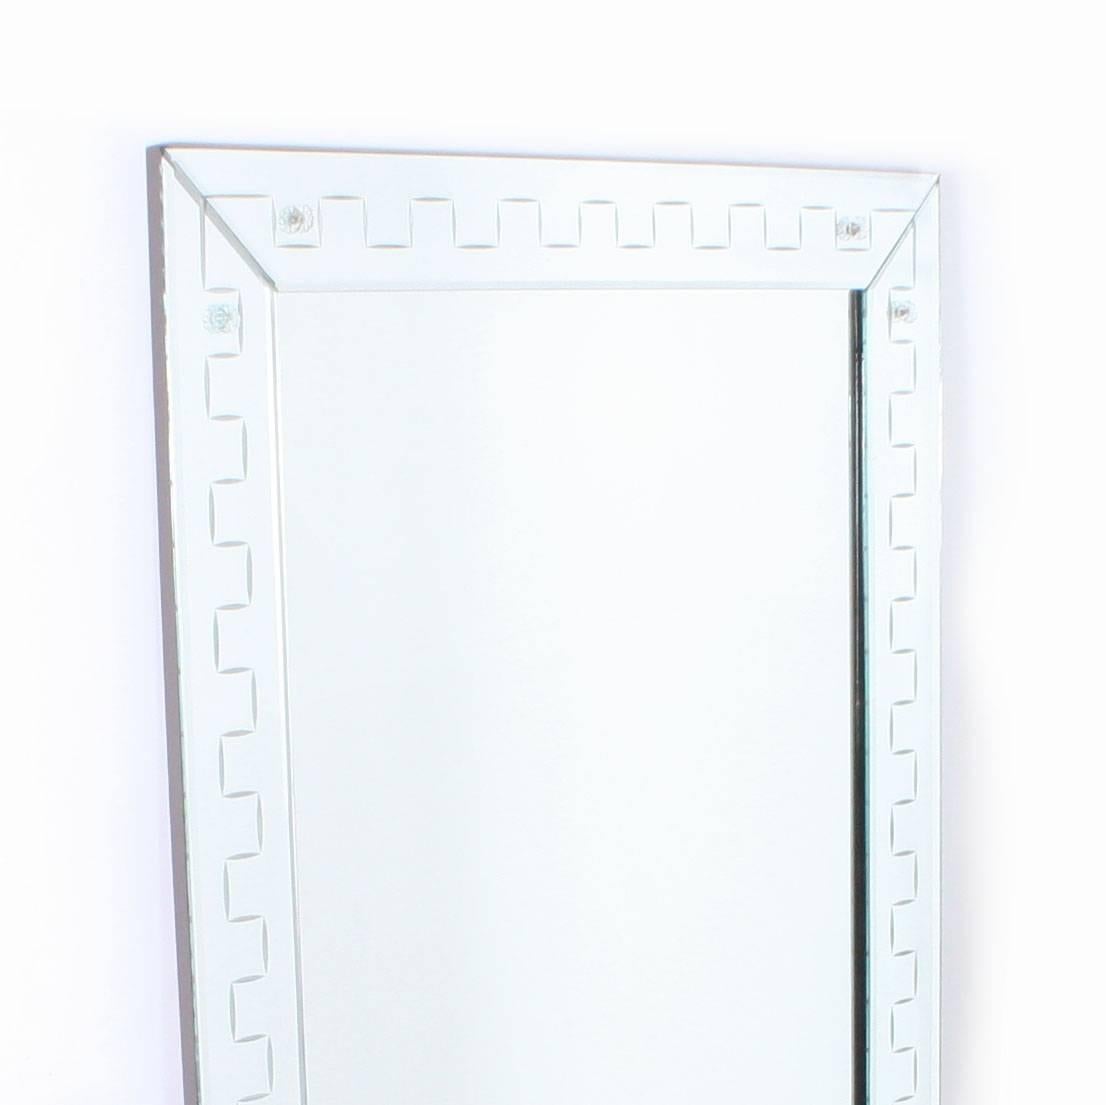 This French clear mirror frame mirror has glass rosettes and Greek key detail along the frame.